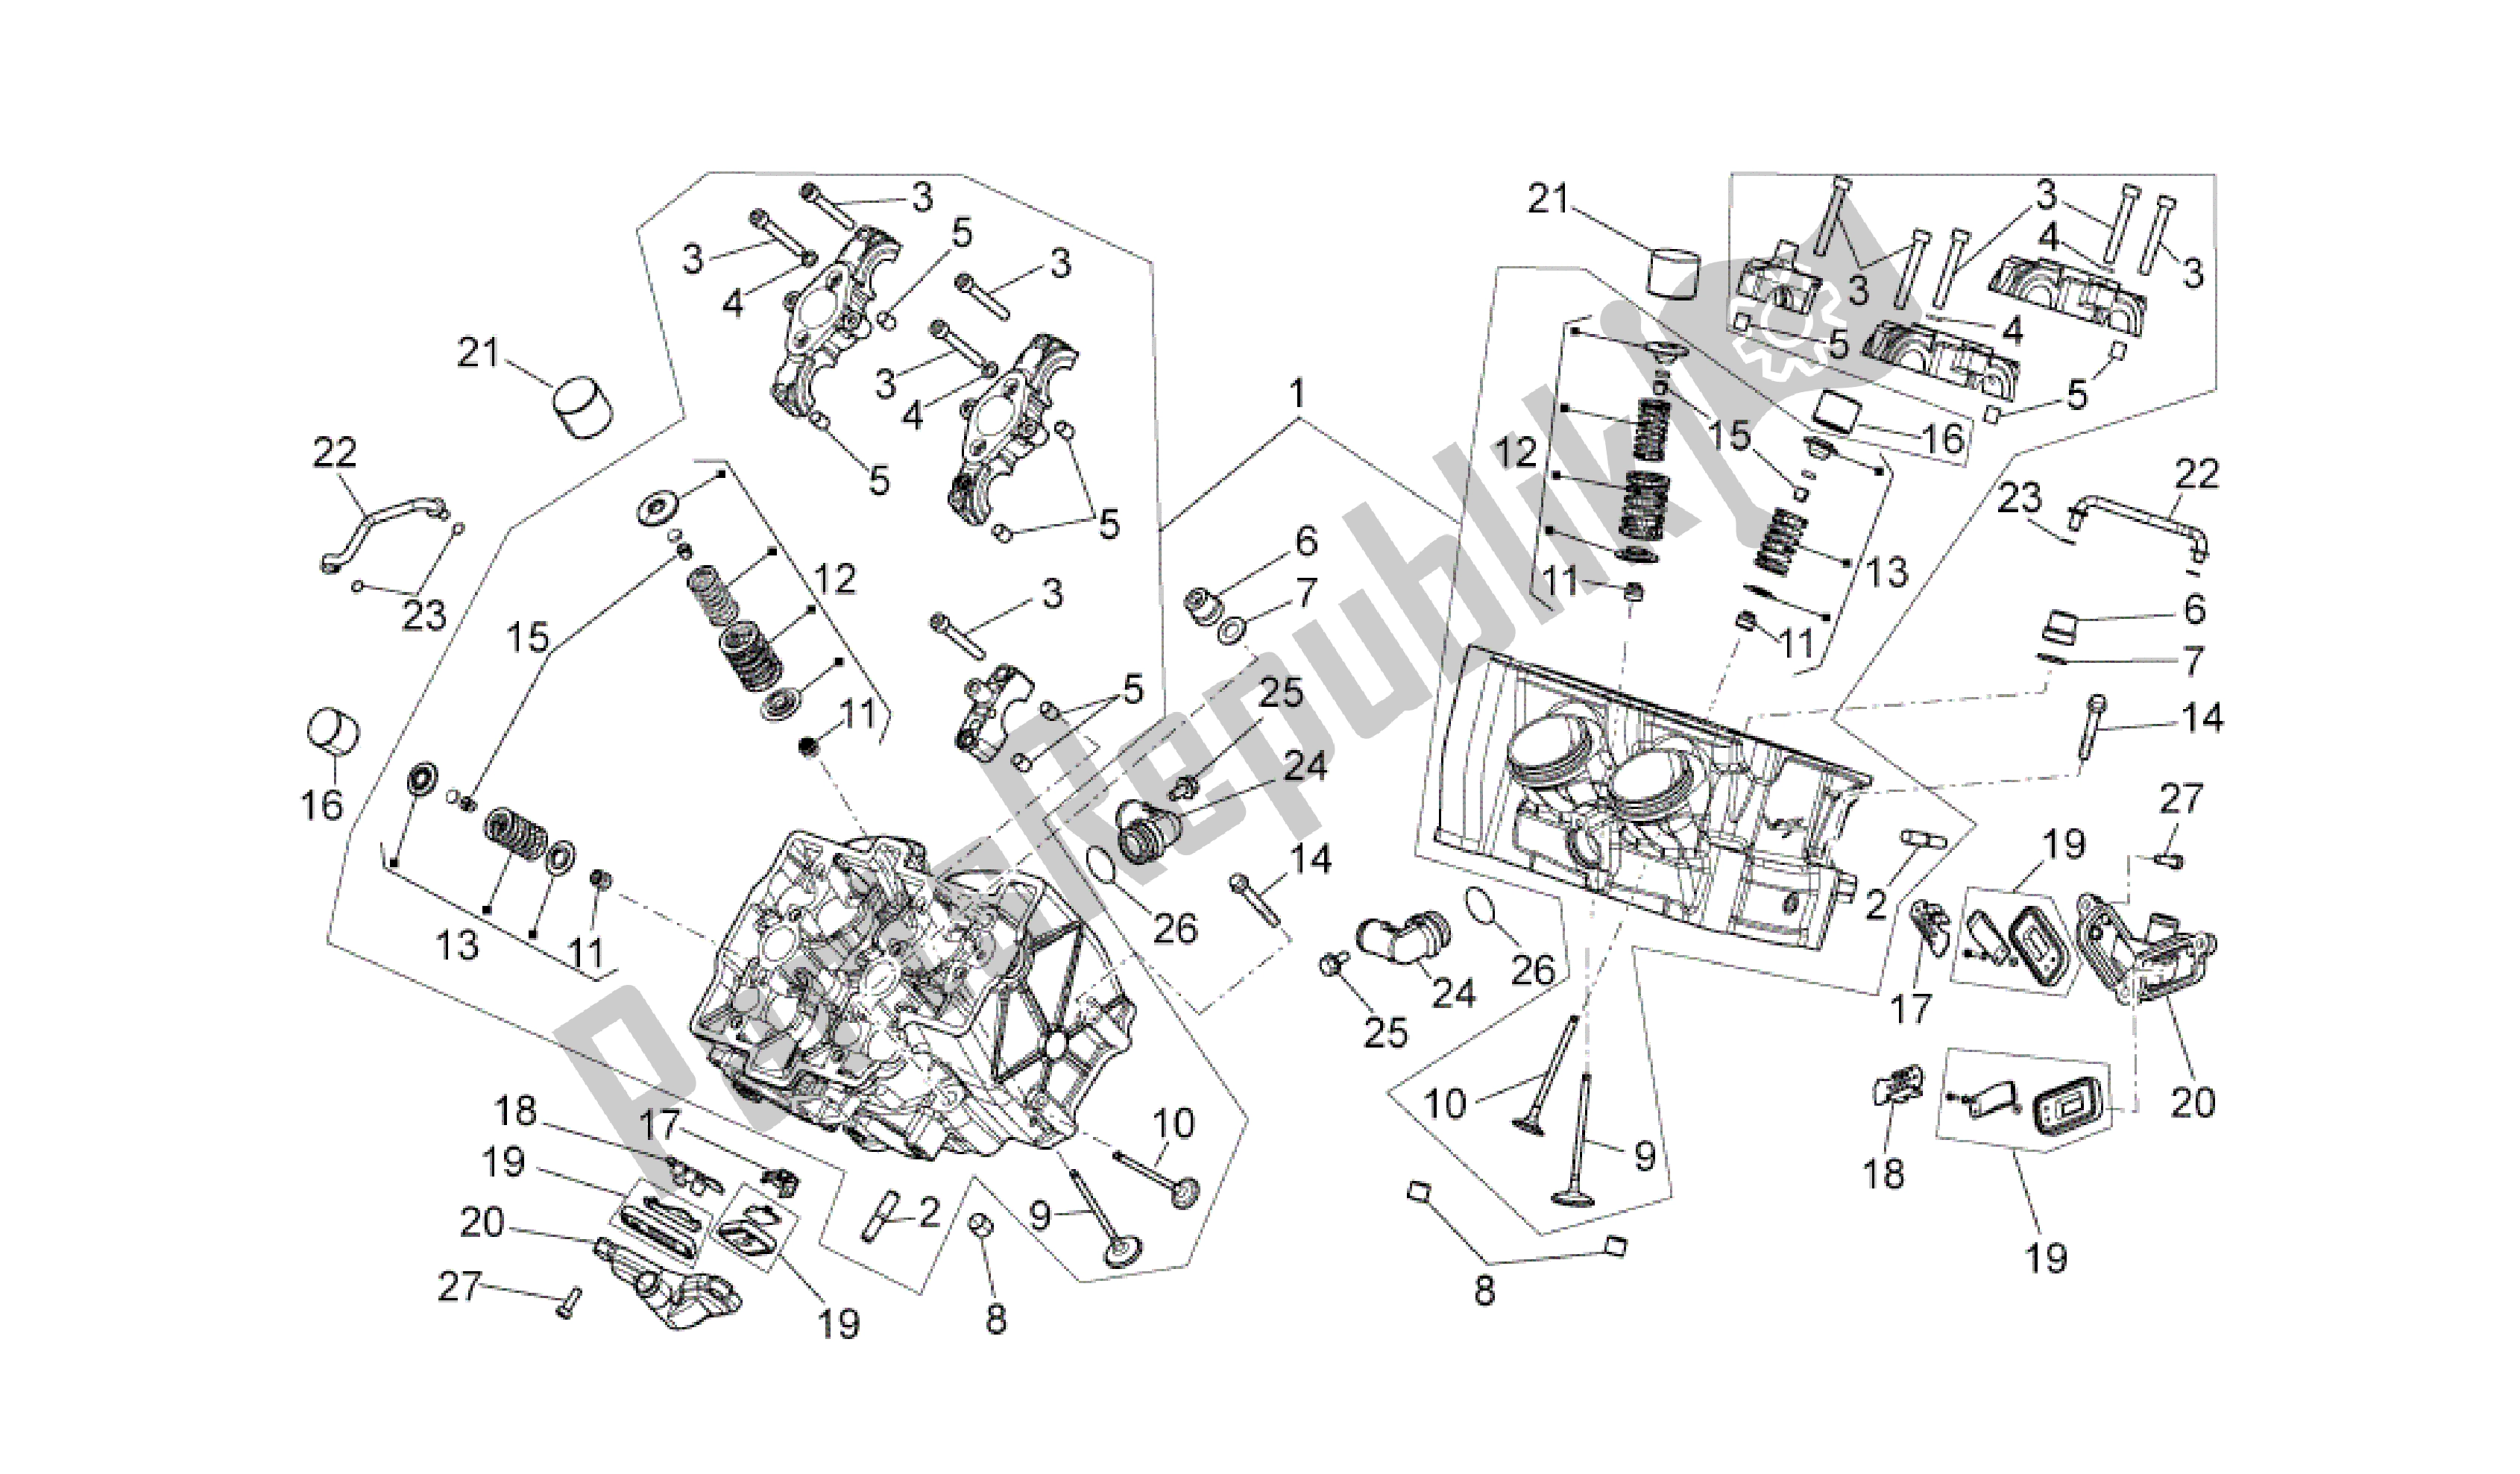 All parts for the Cylinder Head - Valves of the Aprilia RSV4 Factory SBK Racing 3979 1000 2009 - 2010